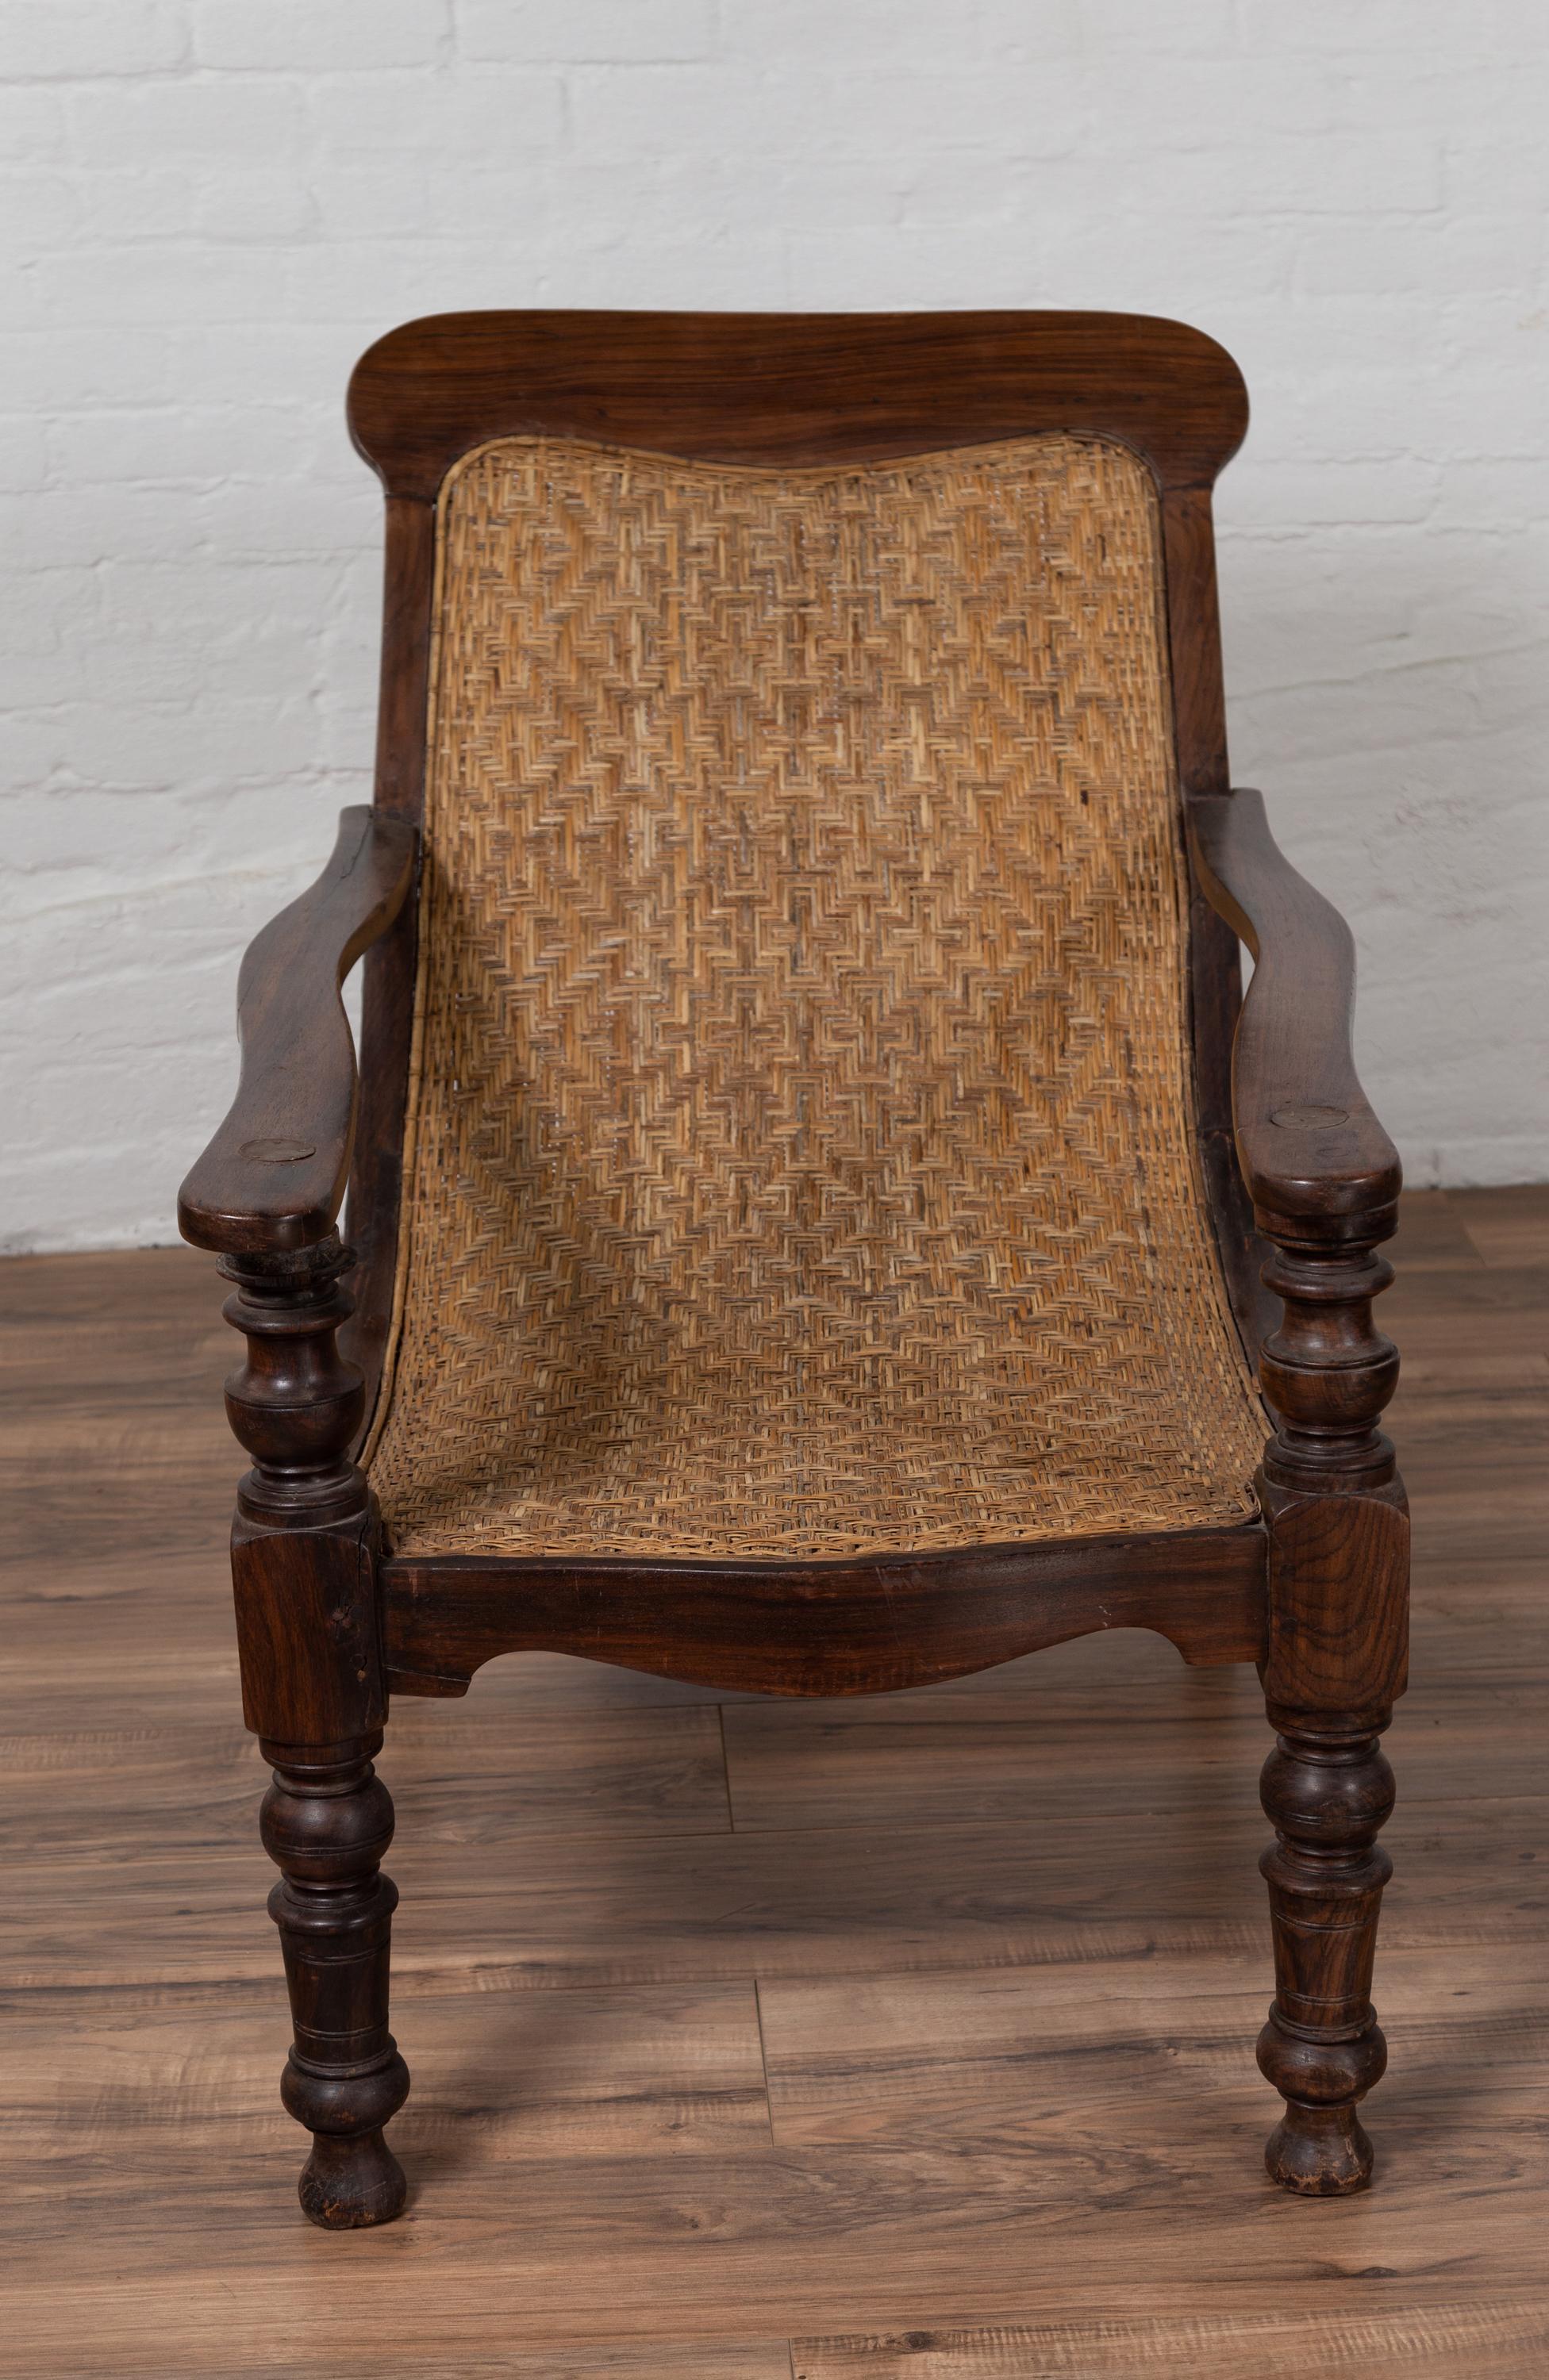 20th Century Antique Dutch Colonial Plantation Lounge Chair with Woven Rattan Seat and Back